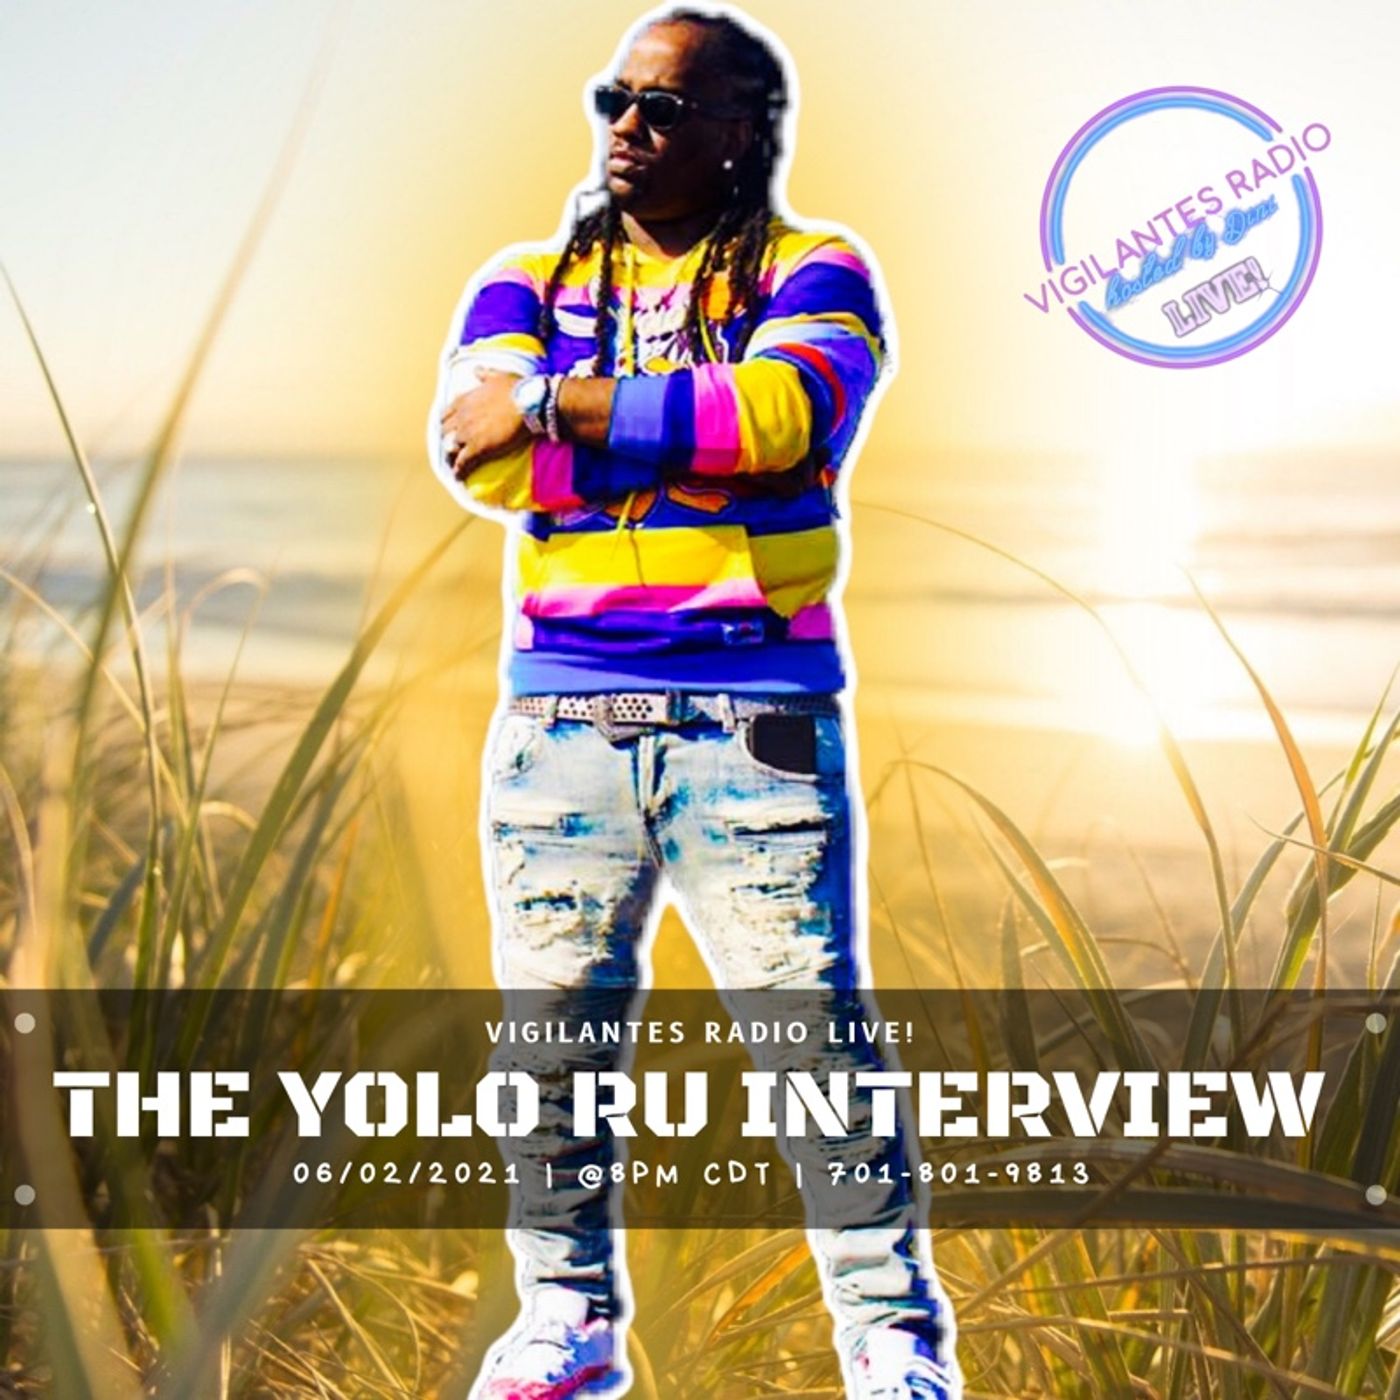 The Yolo Ru Interview. Image